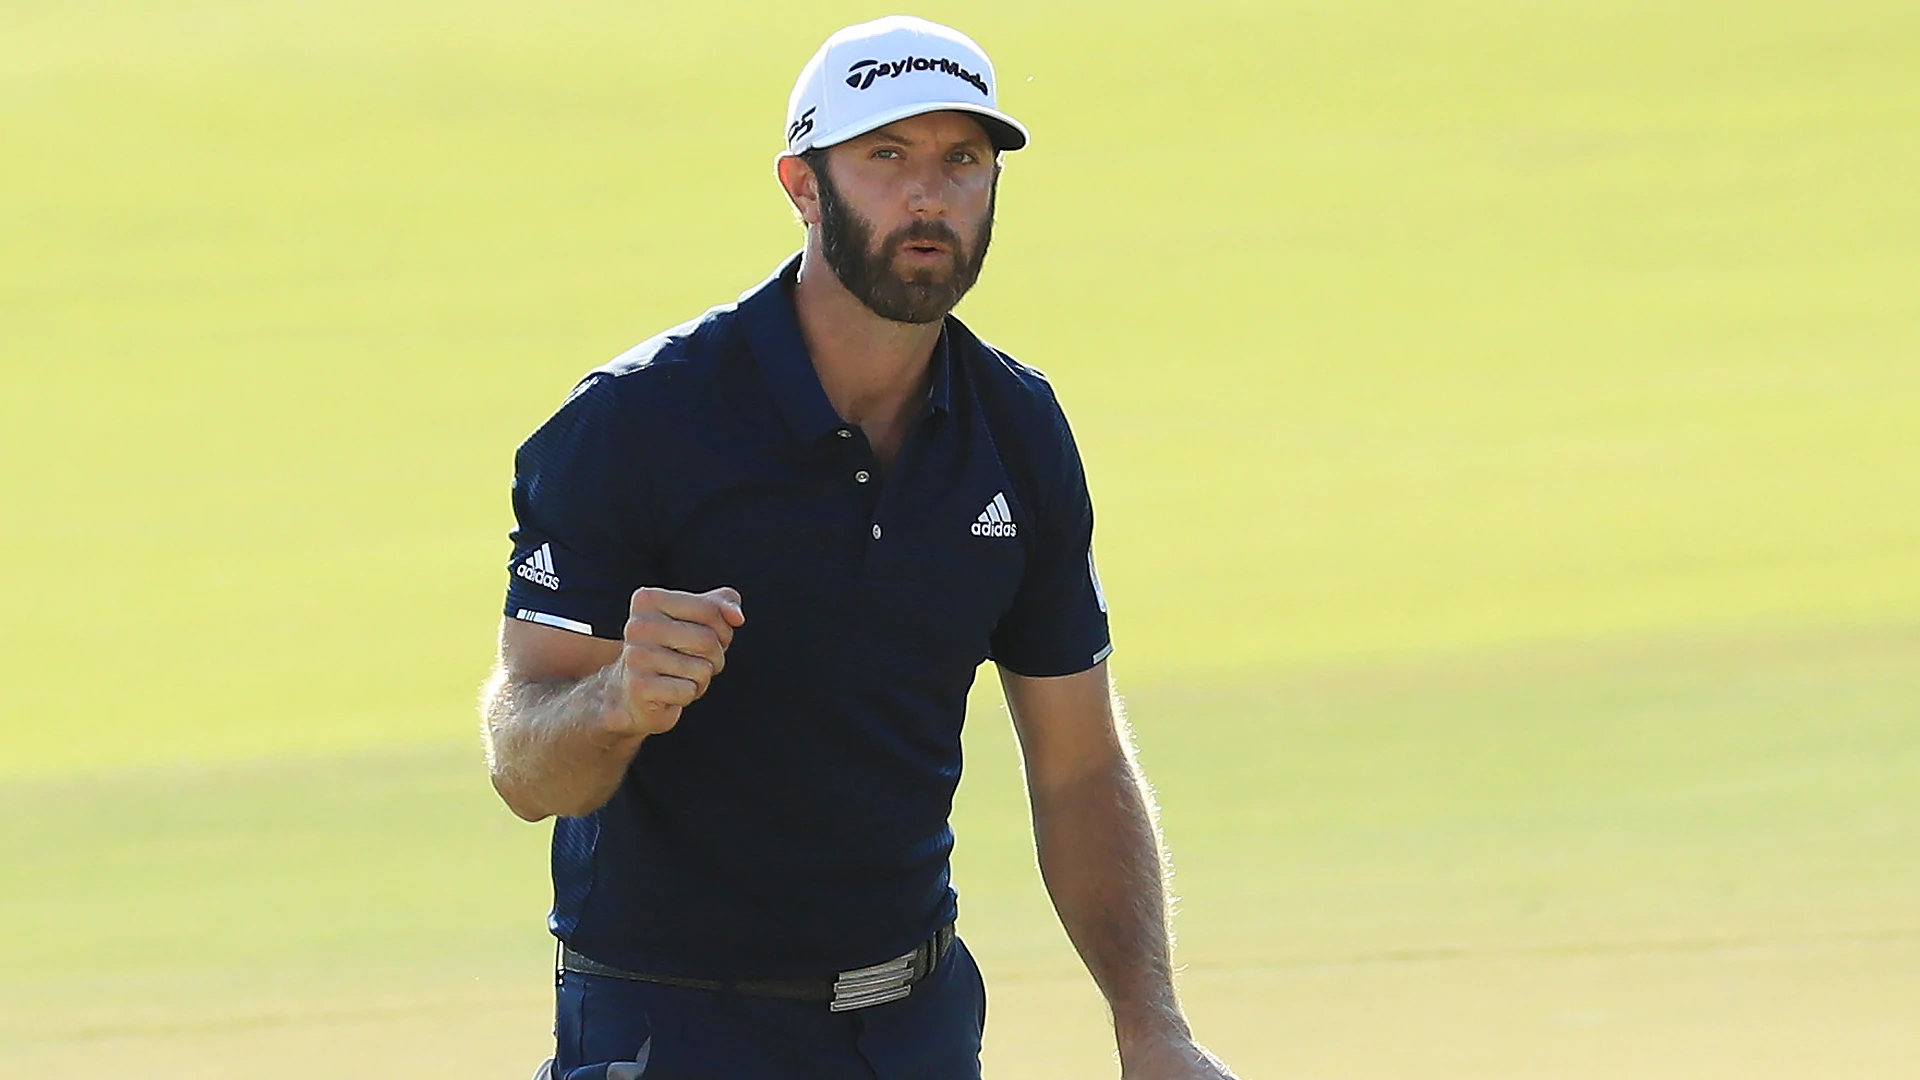 Dustin Johnson remembers when $25K, let alone $15M, was a big deal